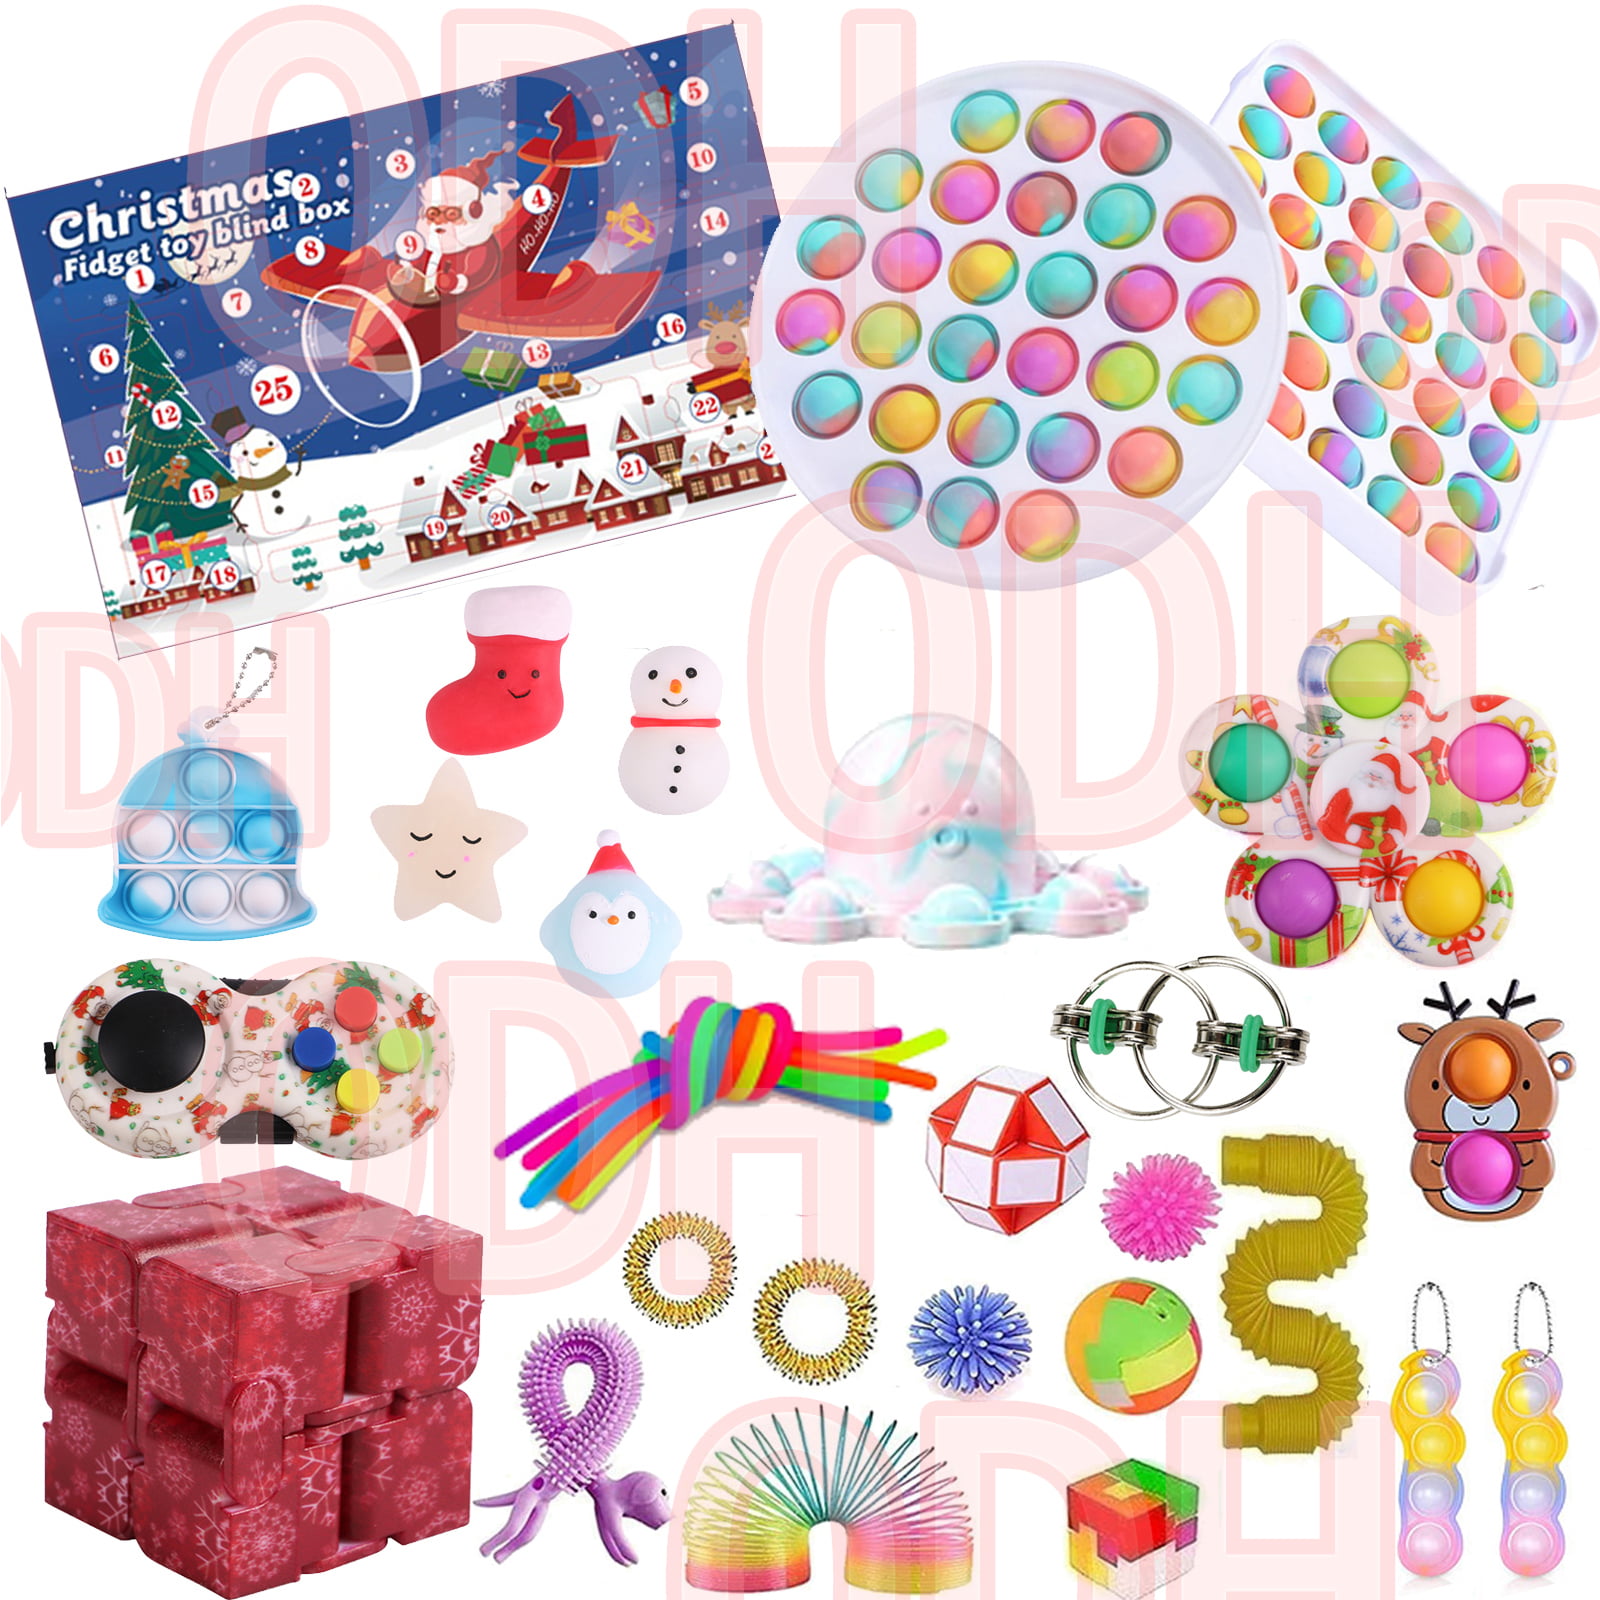 Stress Relief Christmas Surprise Box Gifts Xmas Party Favor Christmas Advent Calendar 2021 Fidget Christmas Countdown Calendar 24 Days Sensory Fidget Toy Set Novelty Decorations Squeezing Toy